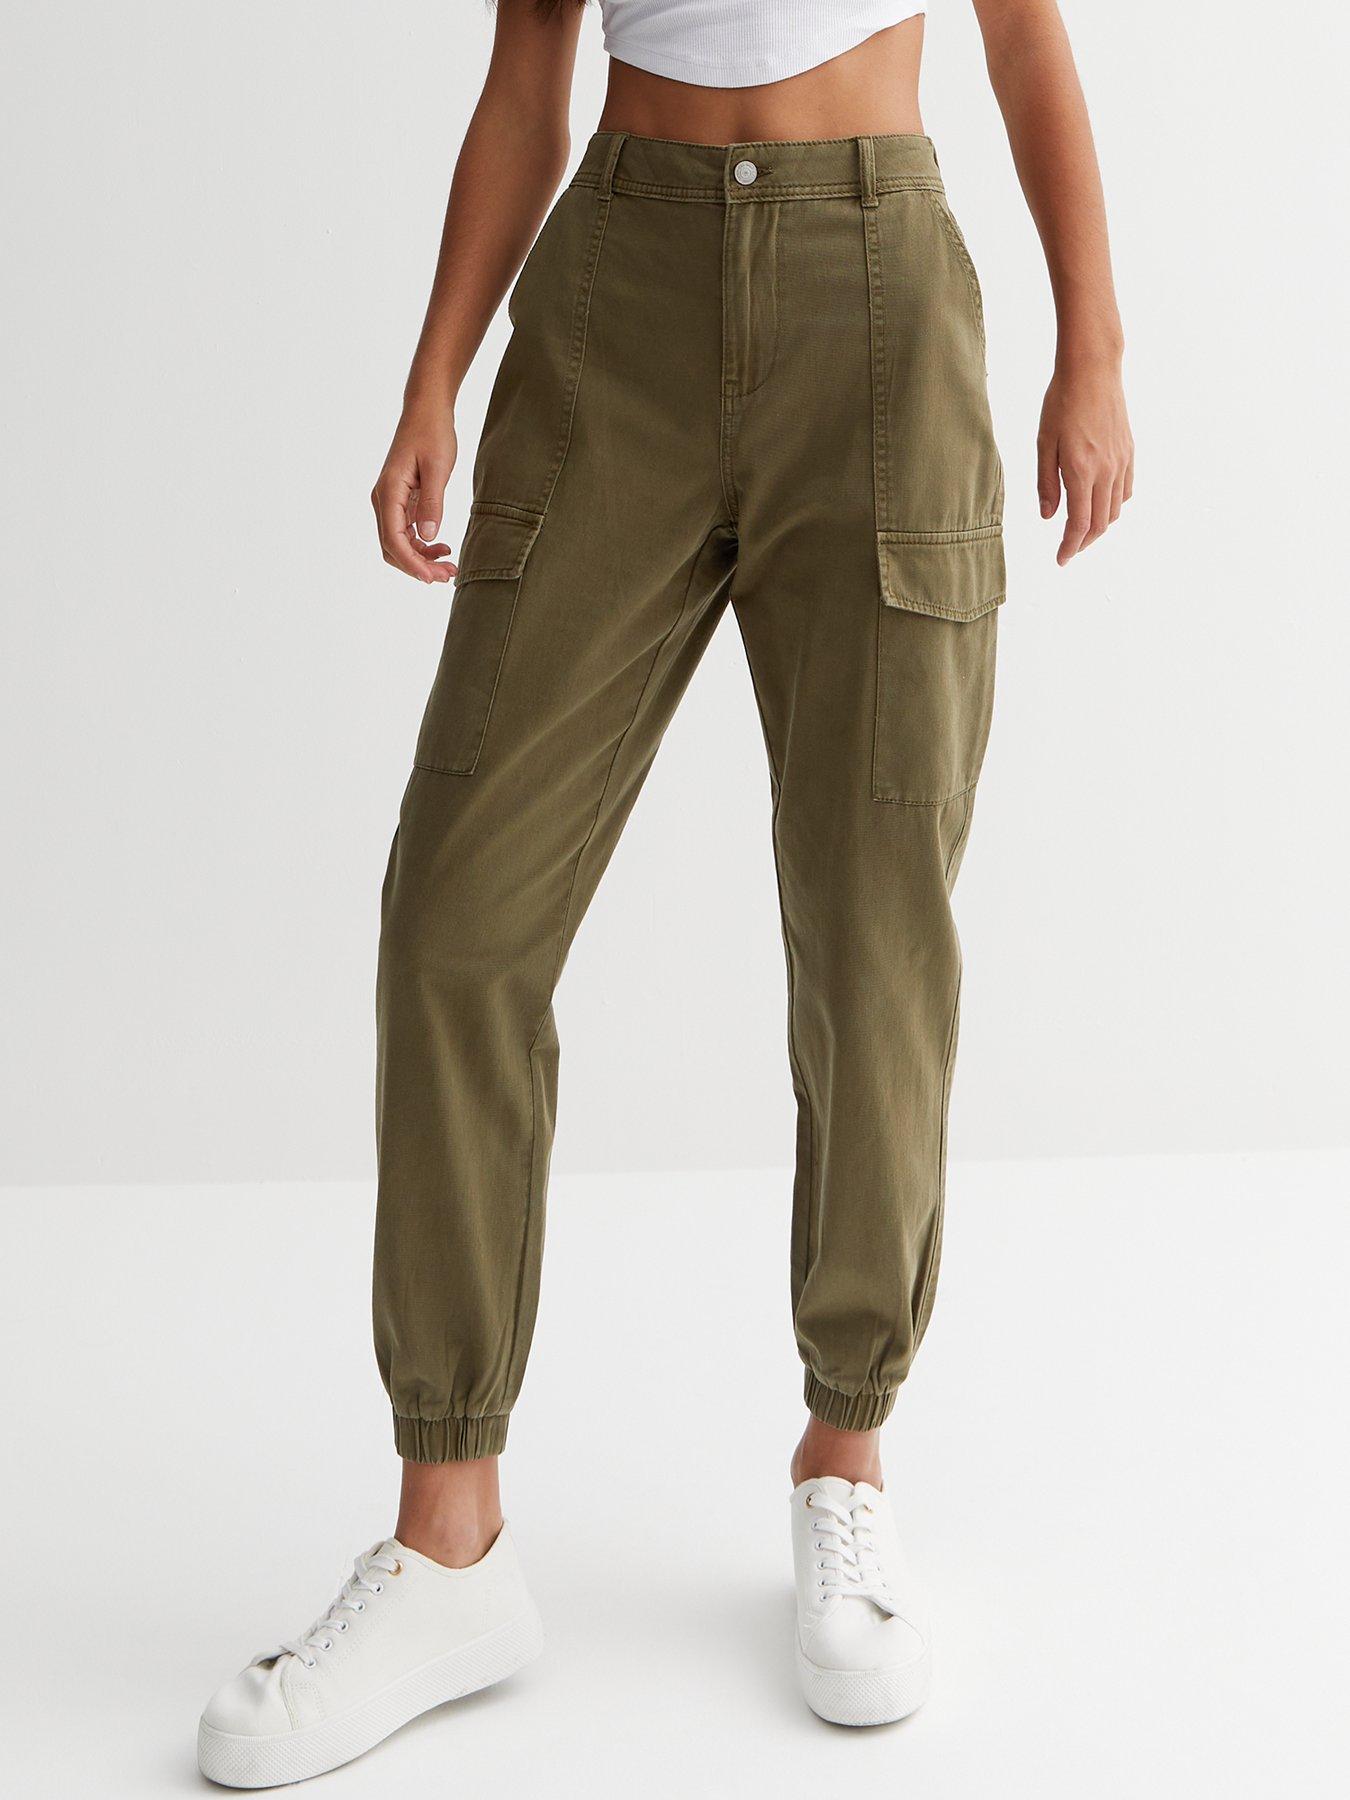 New Look Khaki Cotton Cuffed Cargo Trousers | Very.co.uk